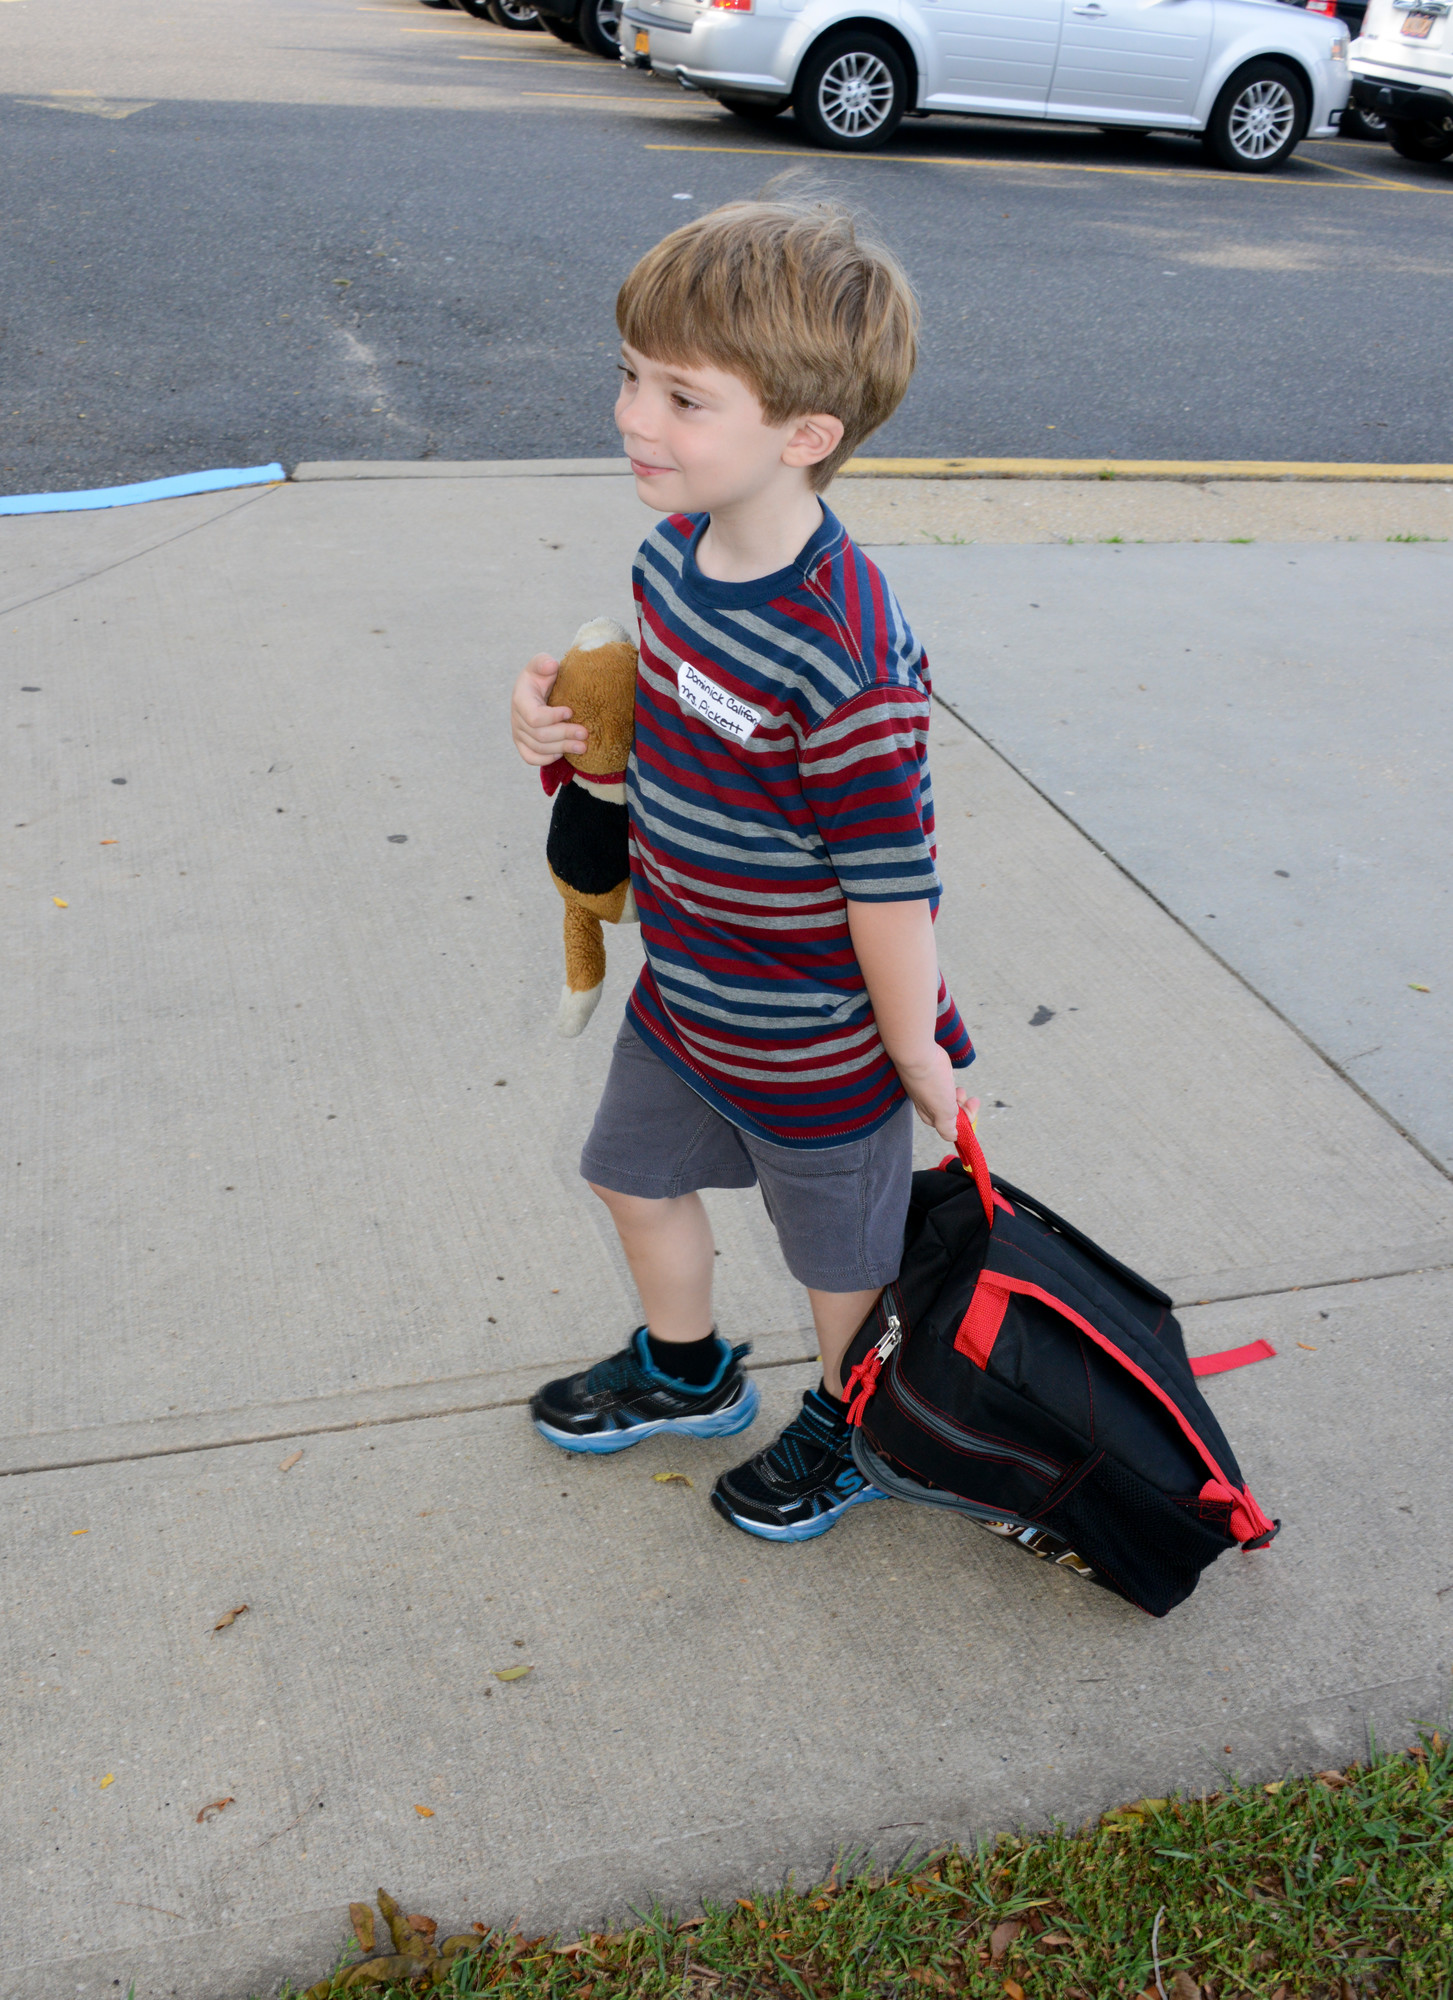 With his teddy bear and a new backpack Dominick Califano, 5, made his way to School No. 6 on September 2.